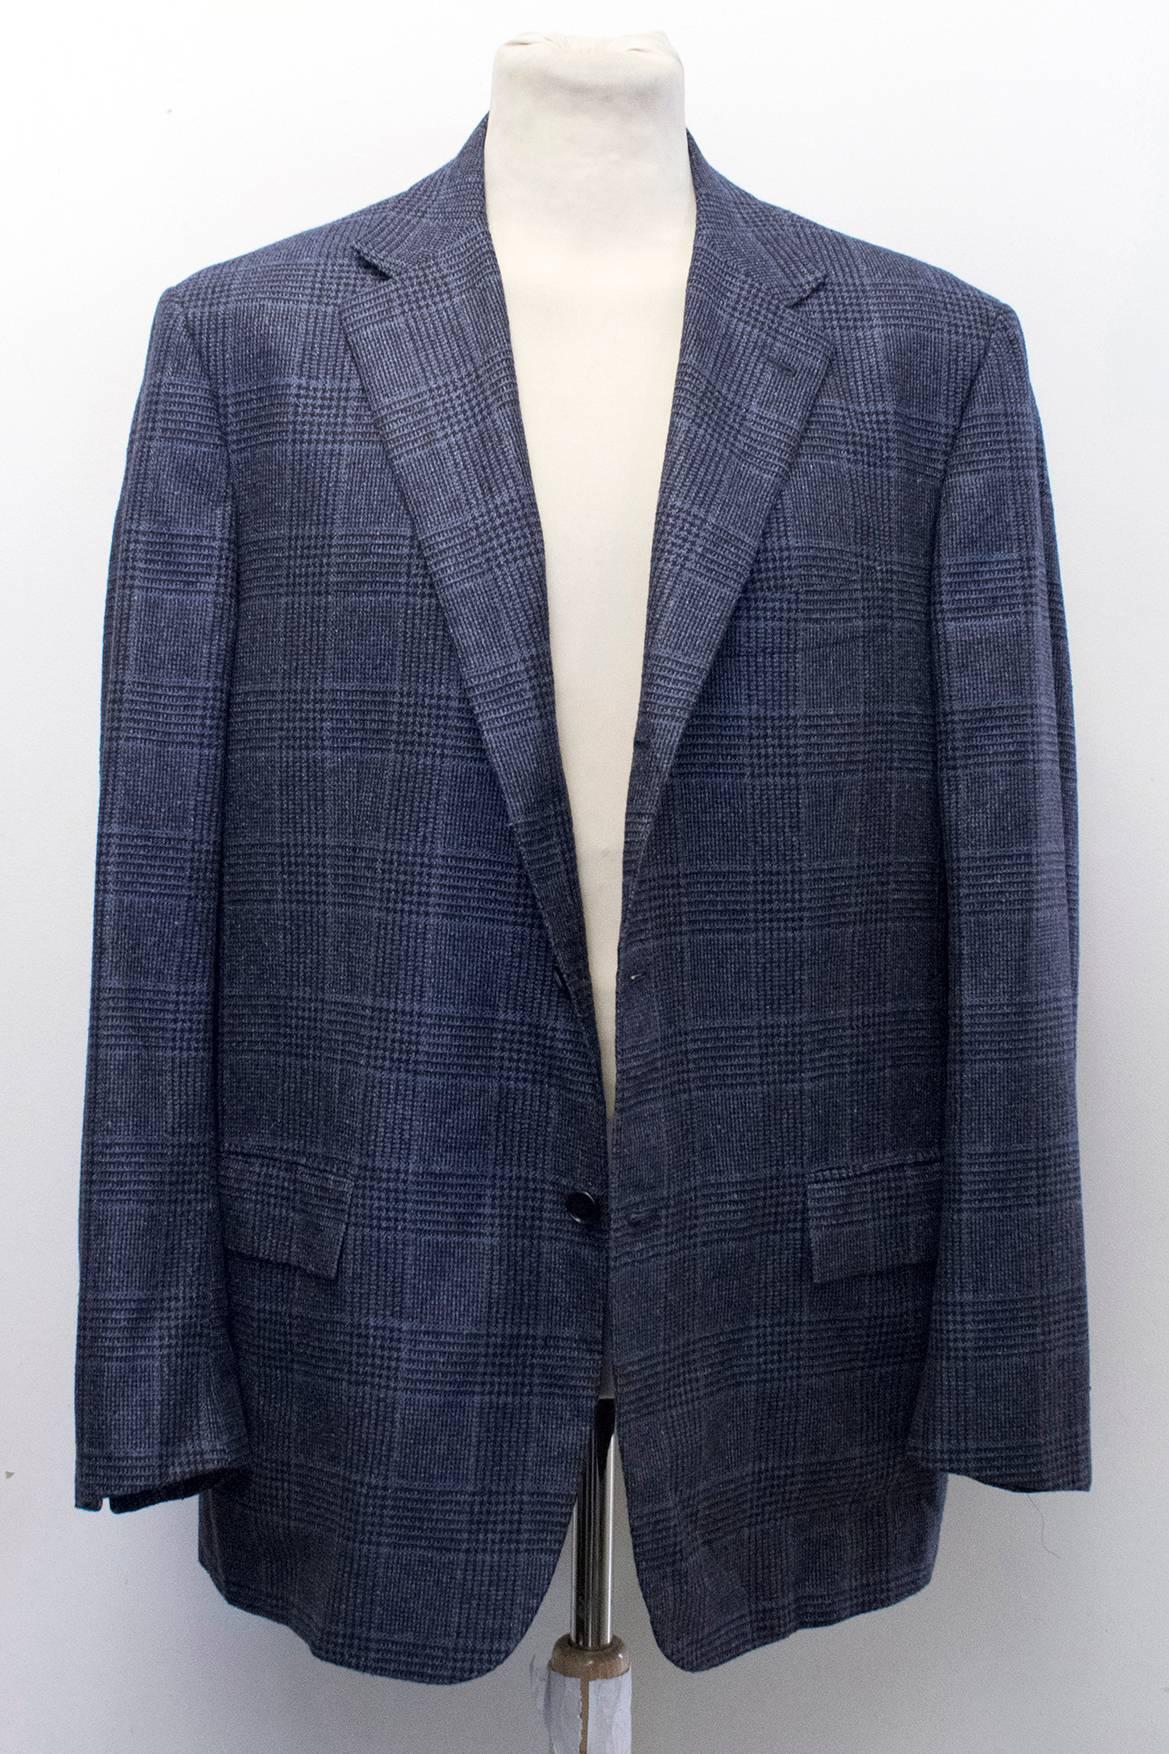 Kiton for Jean Jacques Men's Blue and Black Checked Jacket Size XXL EU 58 For Sale 2